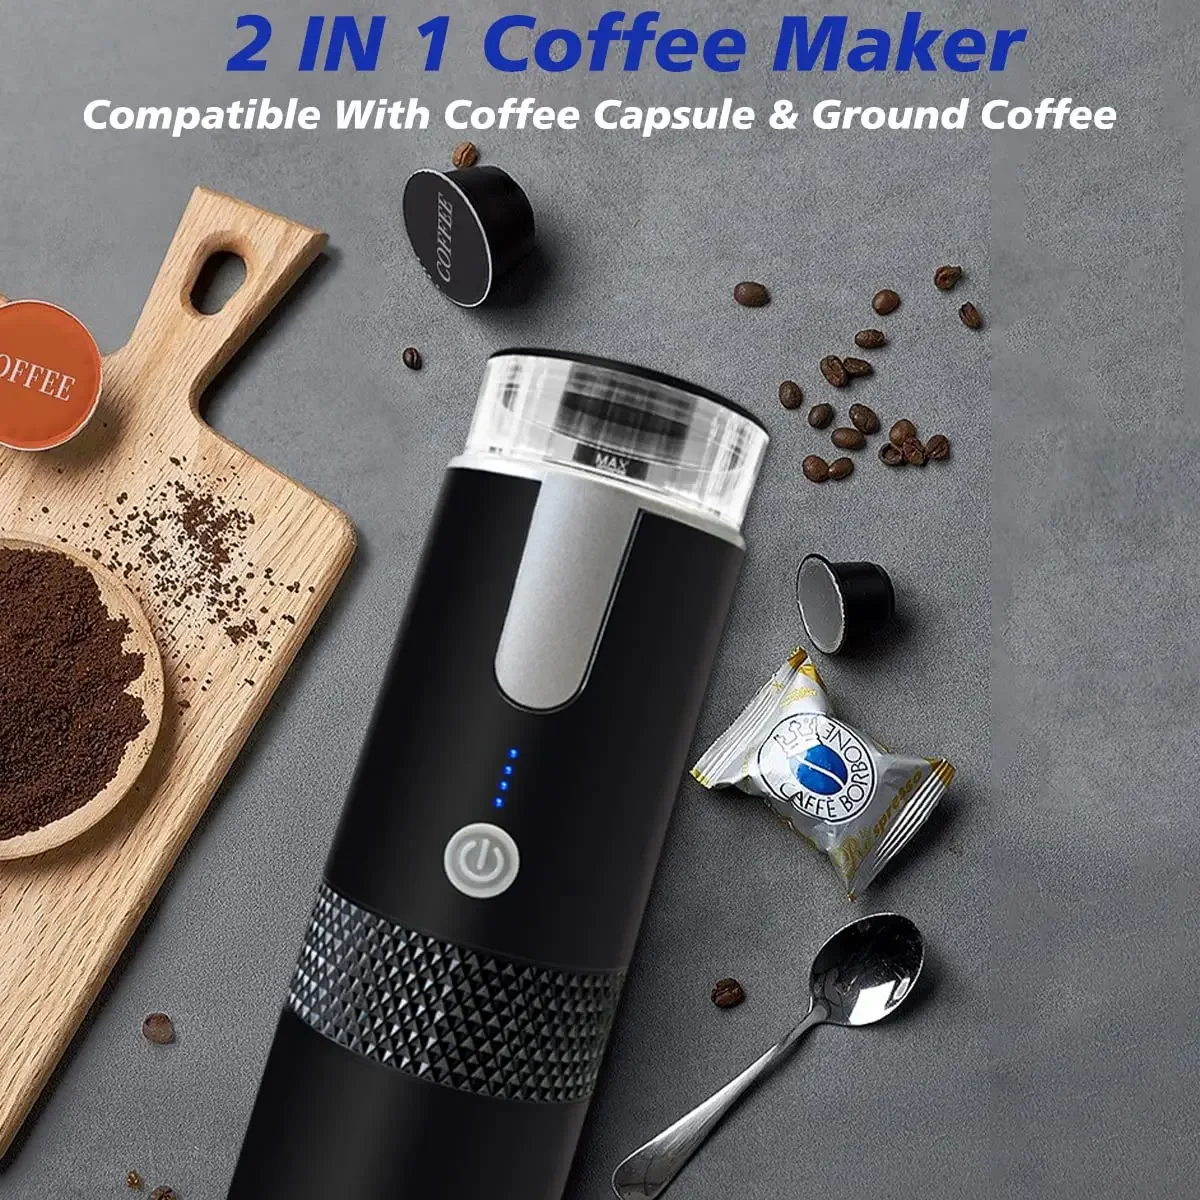 https://ae01.alicdn.com/kf/S496c69c7ab1348f0a4d3779af7f49b90P/Portable-Electric-Coffee-Maker-Espresso-Machine-Compatible-NS-Capsules-Mini-Coffee-Maker-for-Office-Travel-Camping.jpg